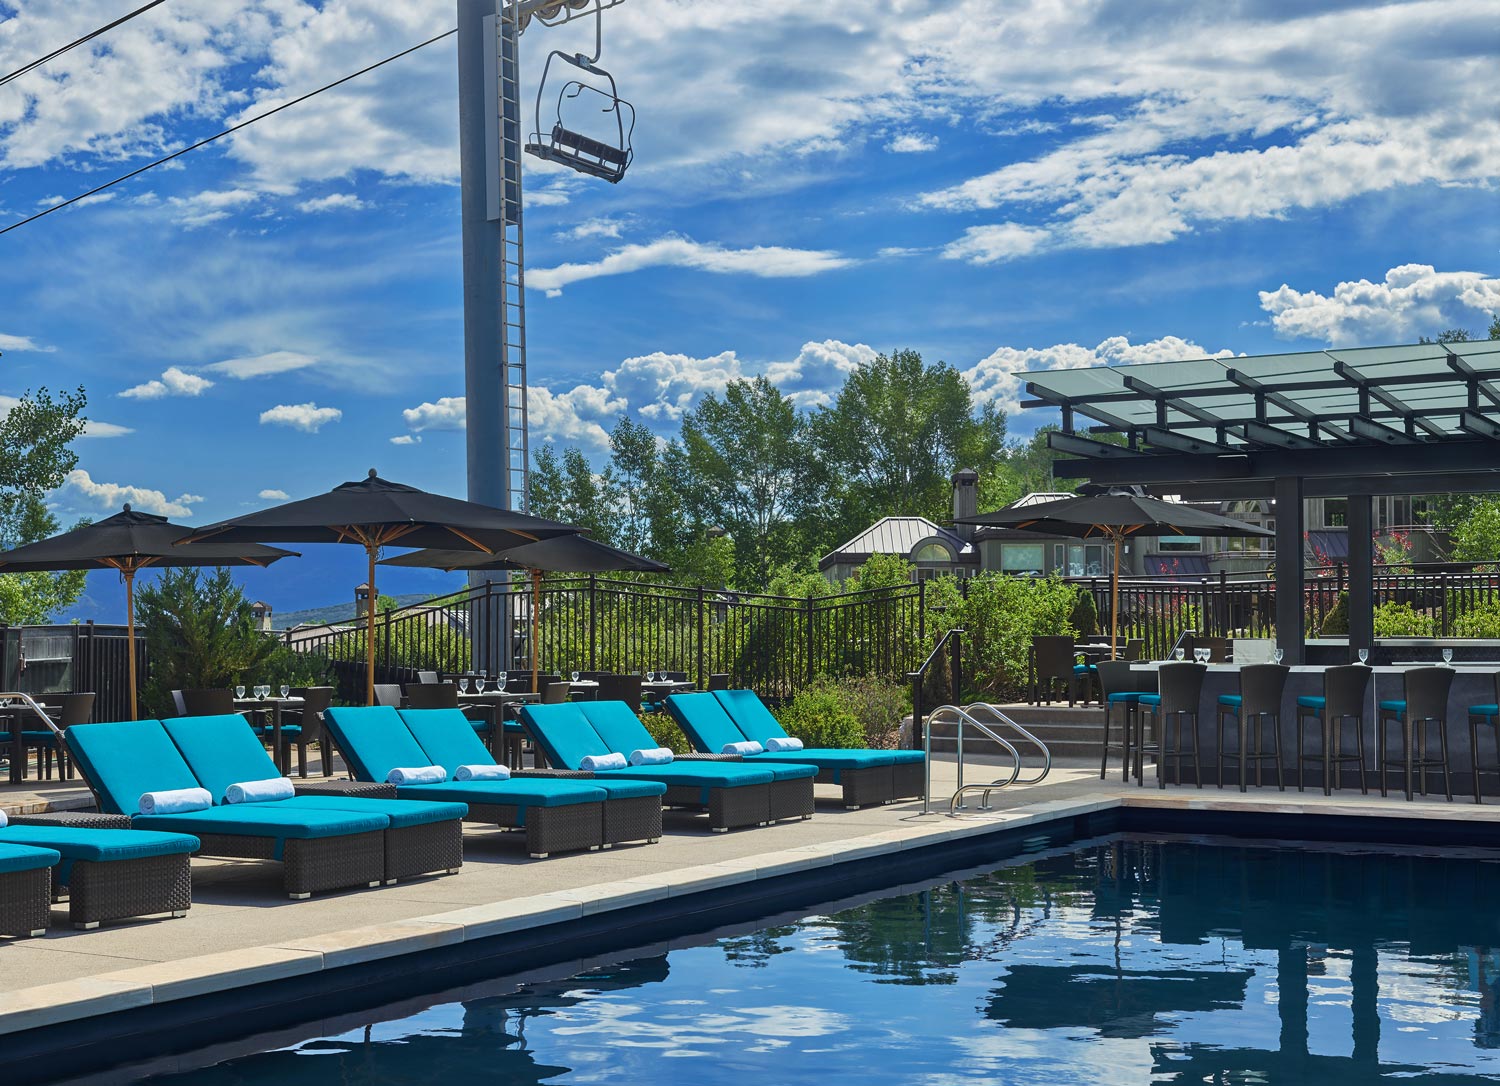 Viceroy pool in Snowmass Base Village